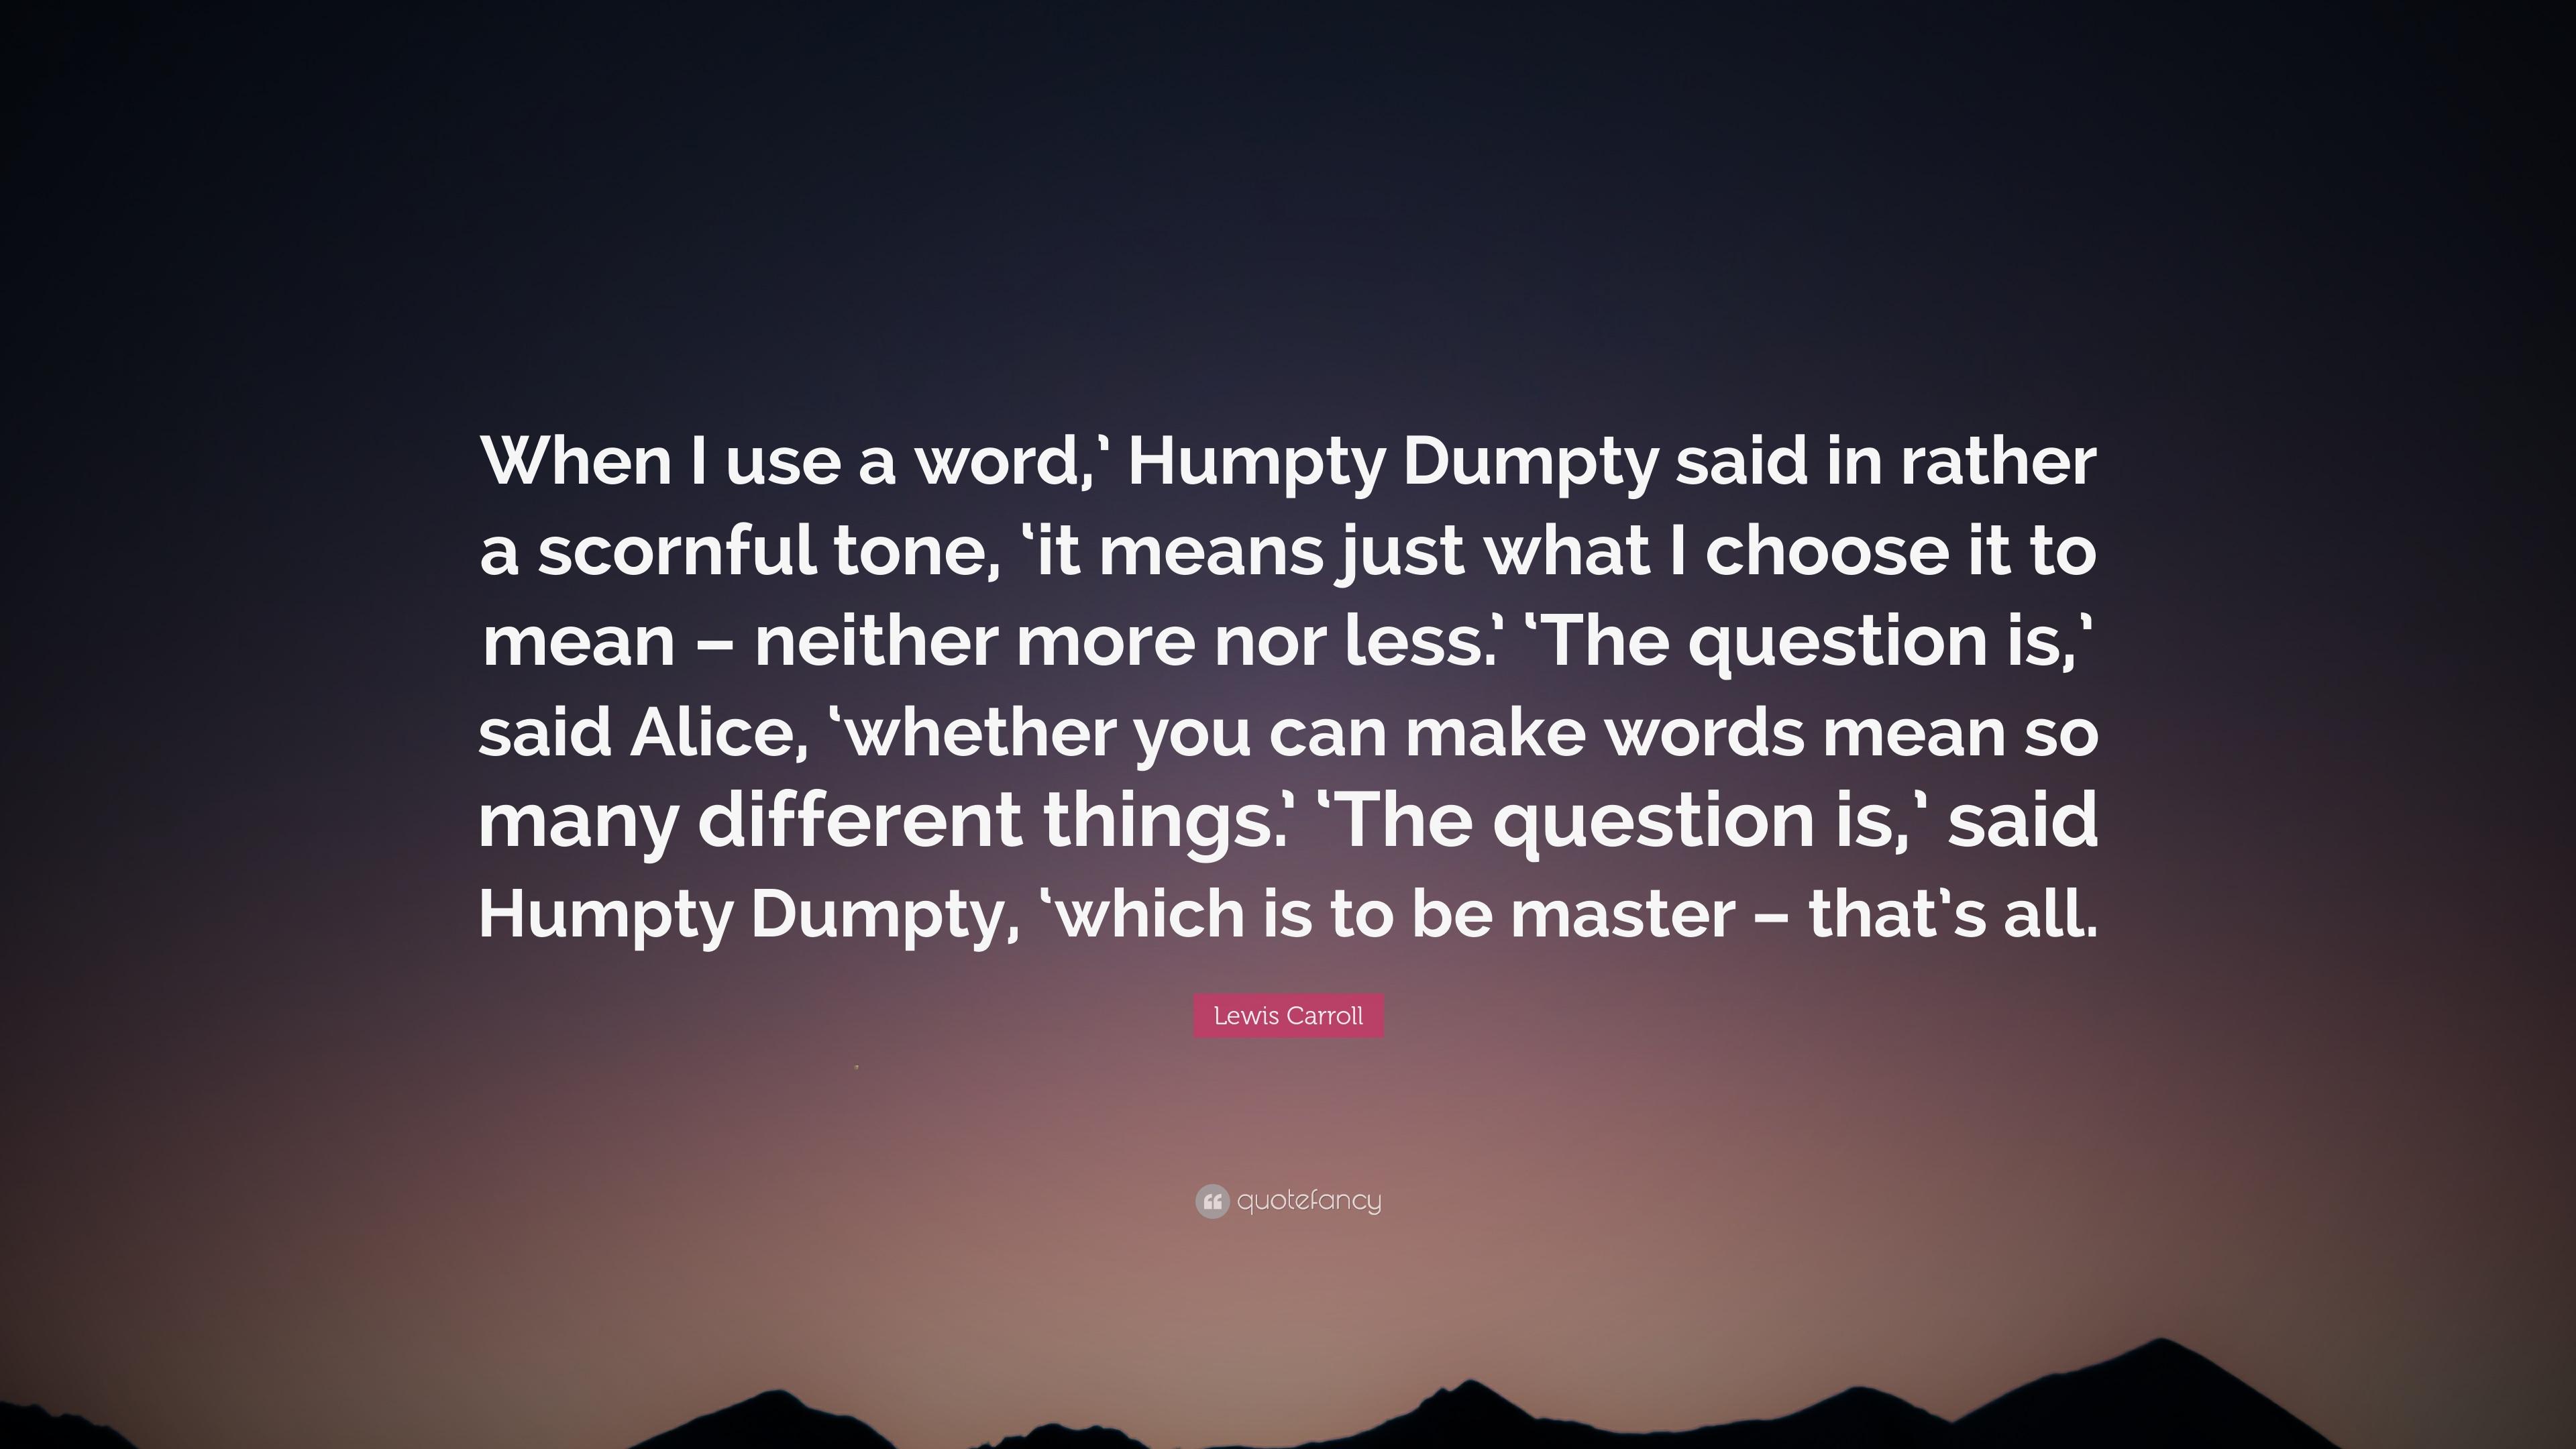 Lewis Carroll Quote: “When I use a word, ' Humpty Dumpty said